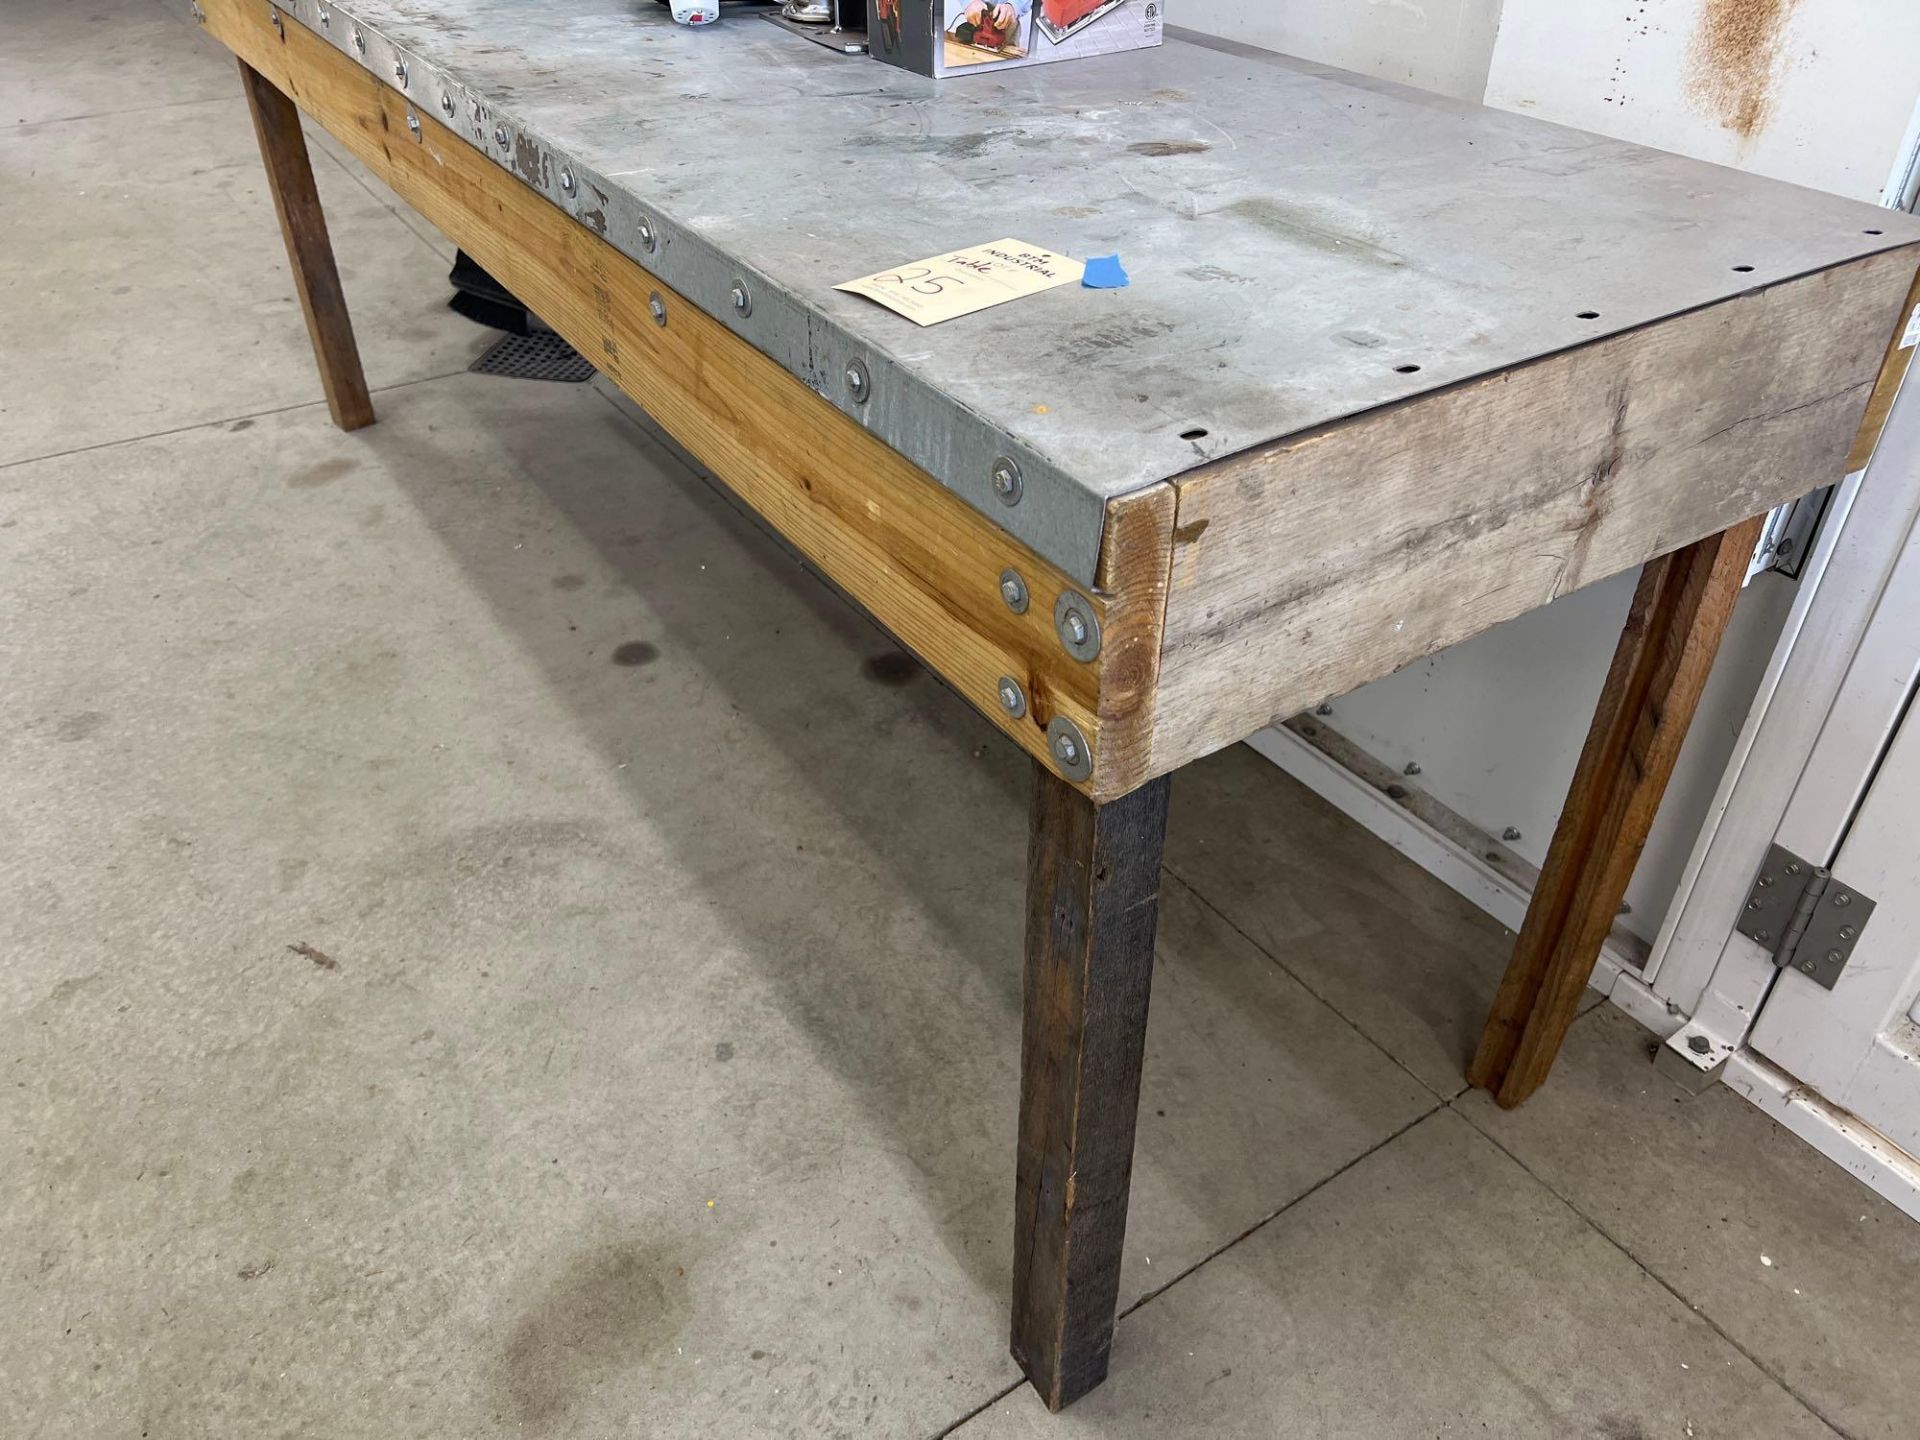 Wood Workbench with Metal Top - Image 2 of 2